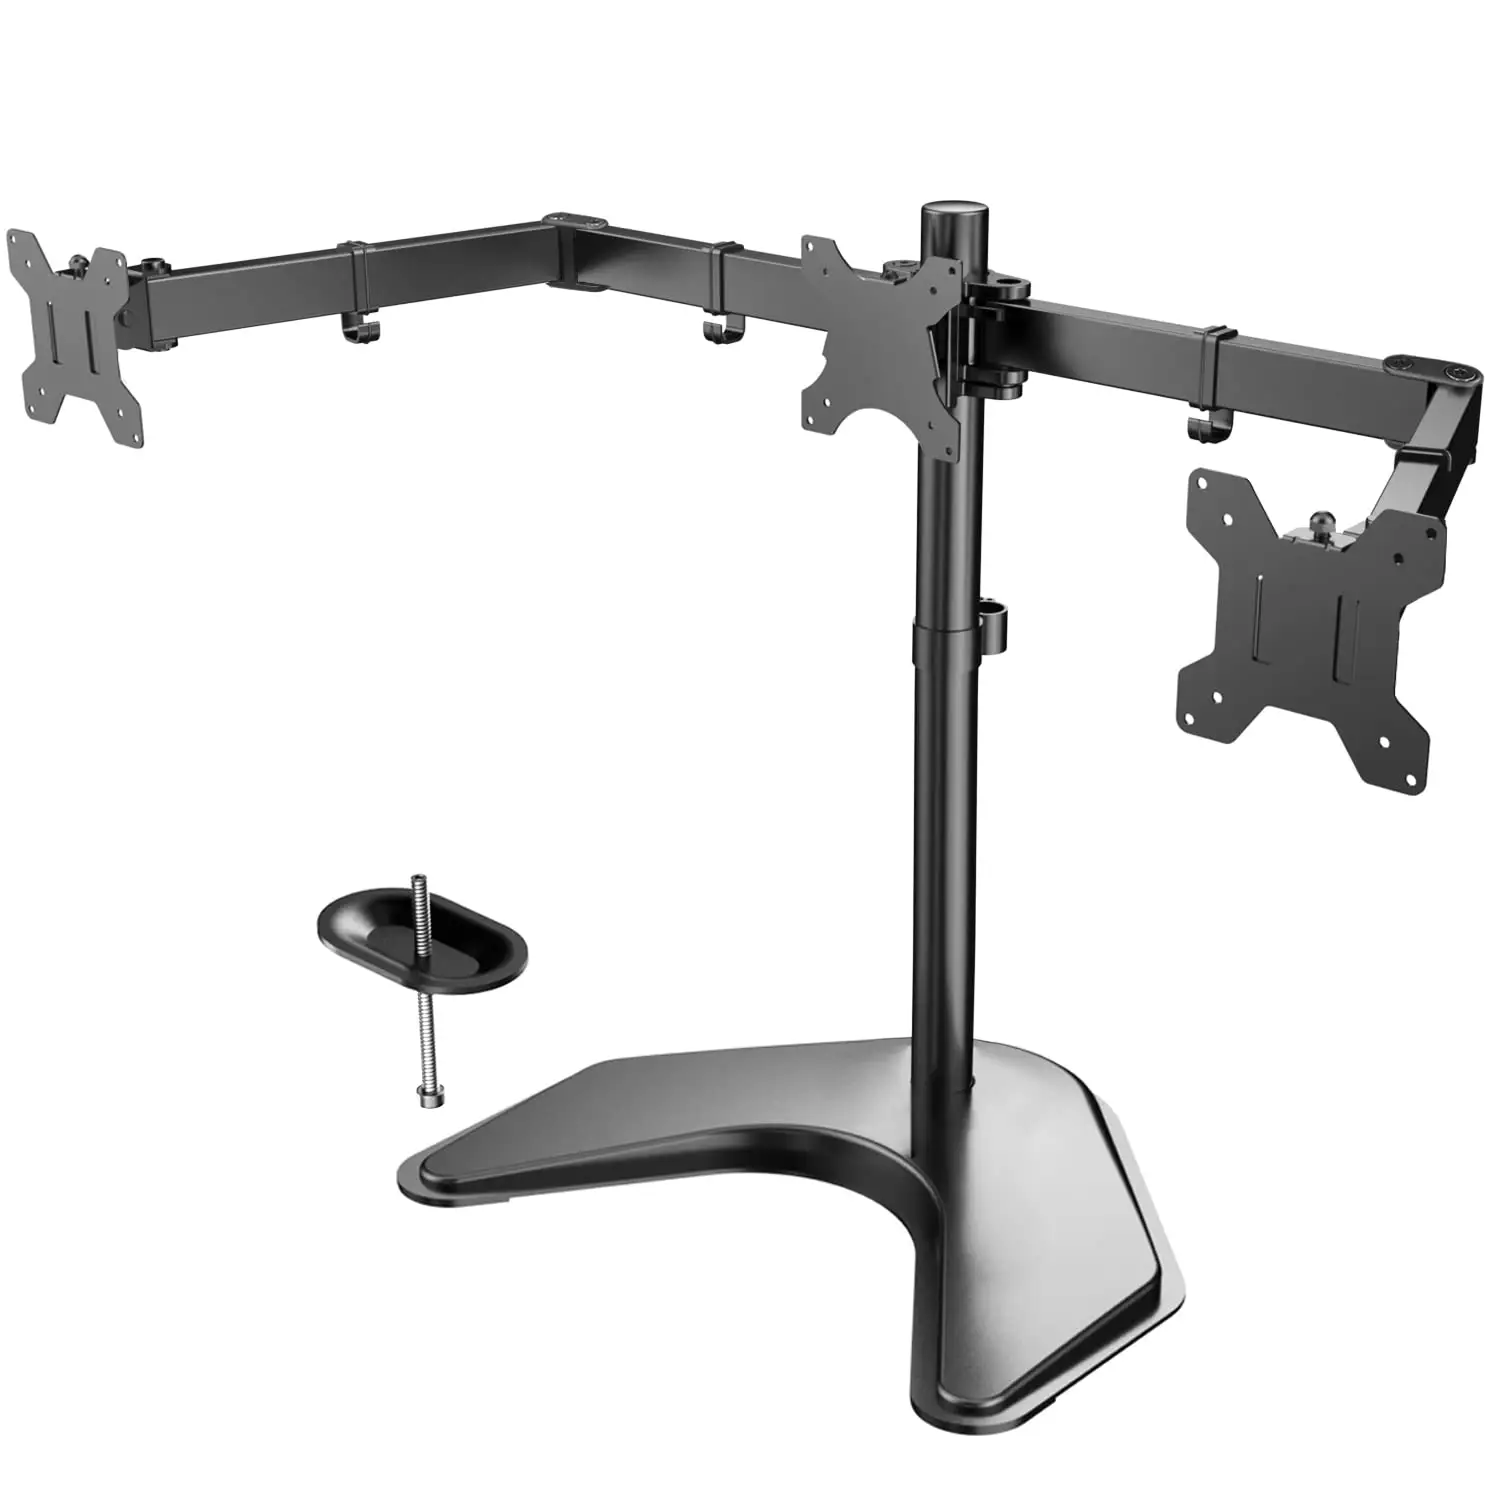 HUANUO 13" to 24" Triple Monitor Stand Free Standing Black Anodized Aluminum Triple screen Curved Monitor Mount Stand